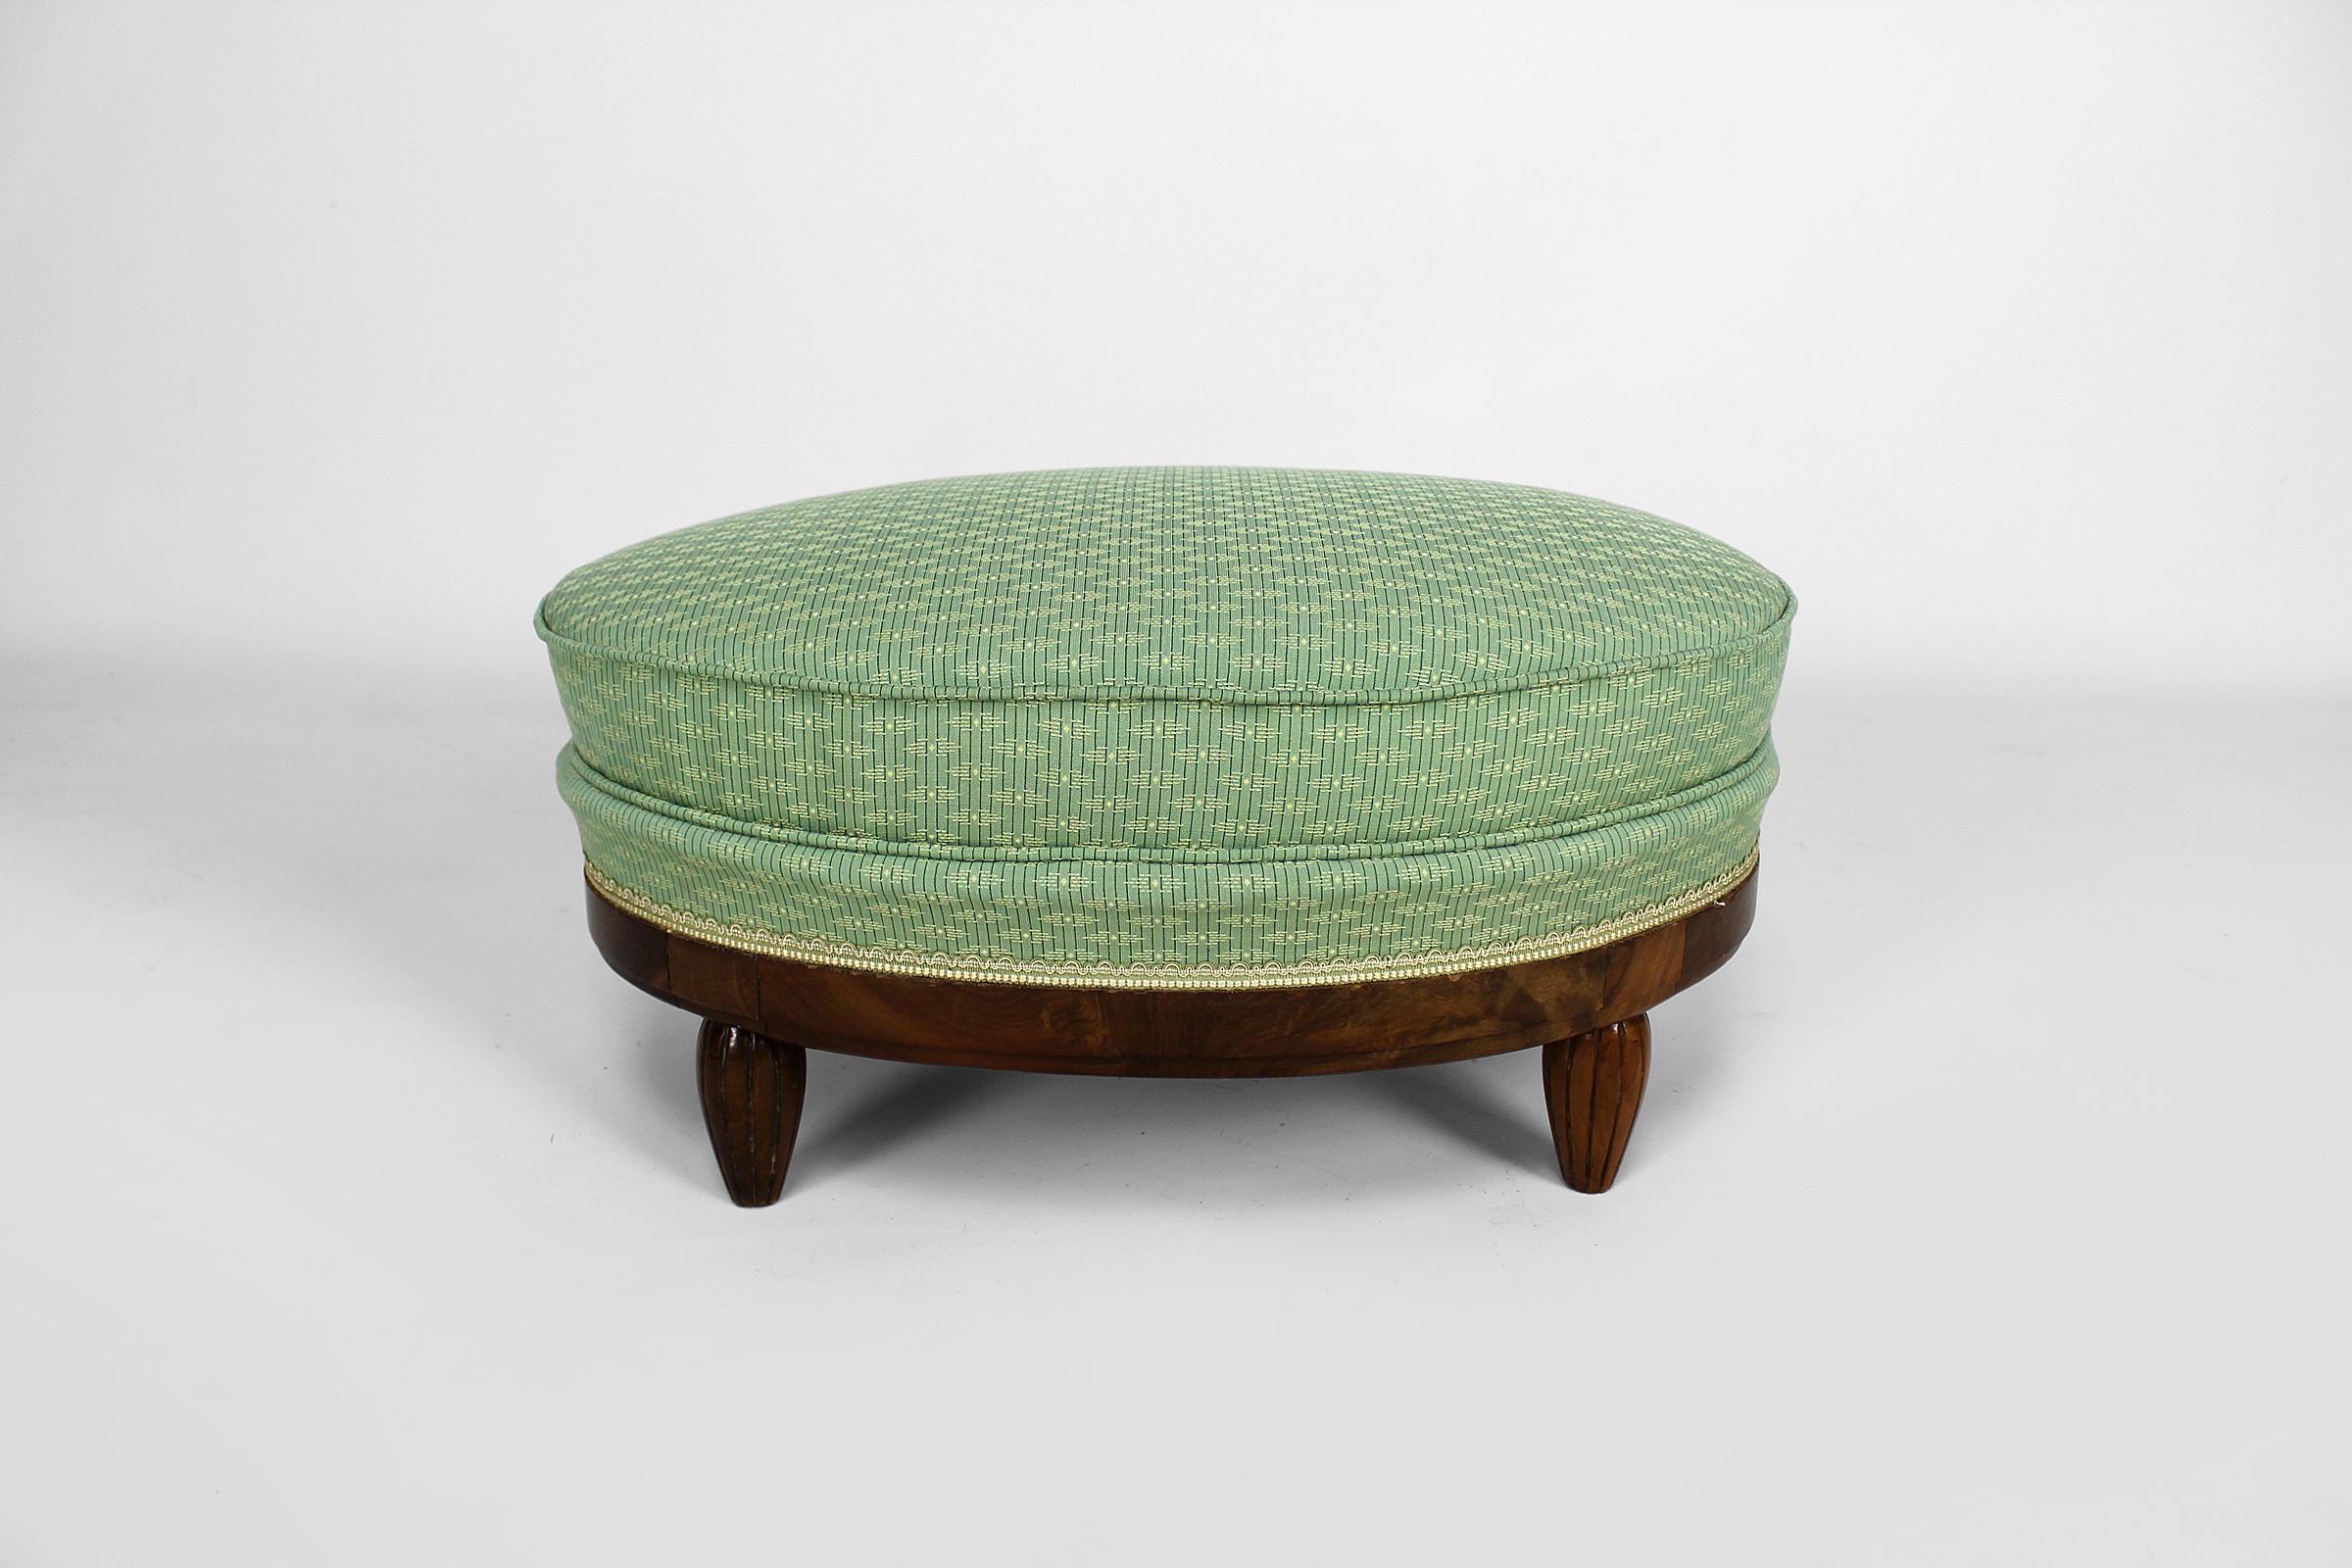 Art Deco Psyche Dressing Table and Pouf by Ateliers Gauthier-Poinsignon, c. 1920 For Sale 12